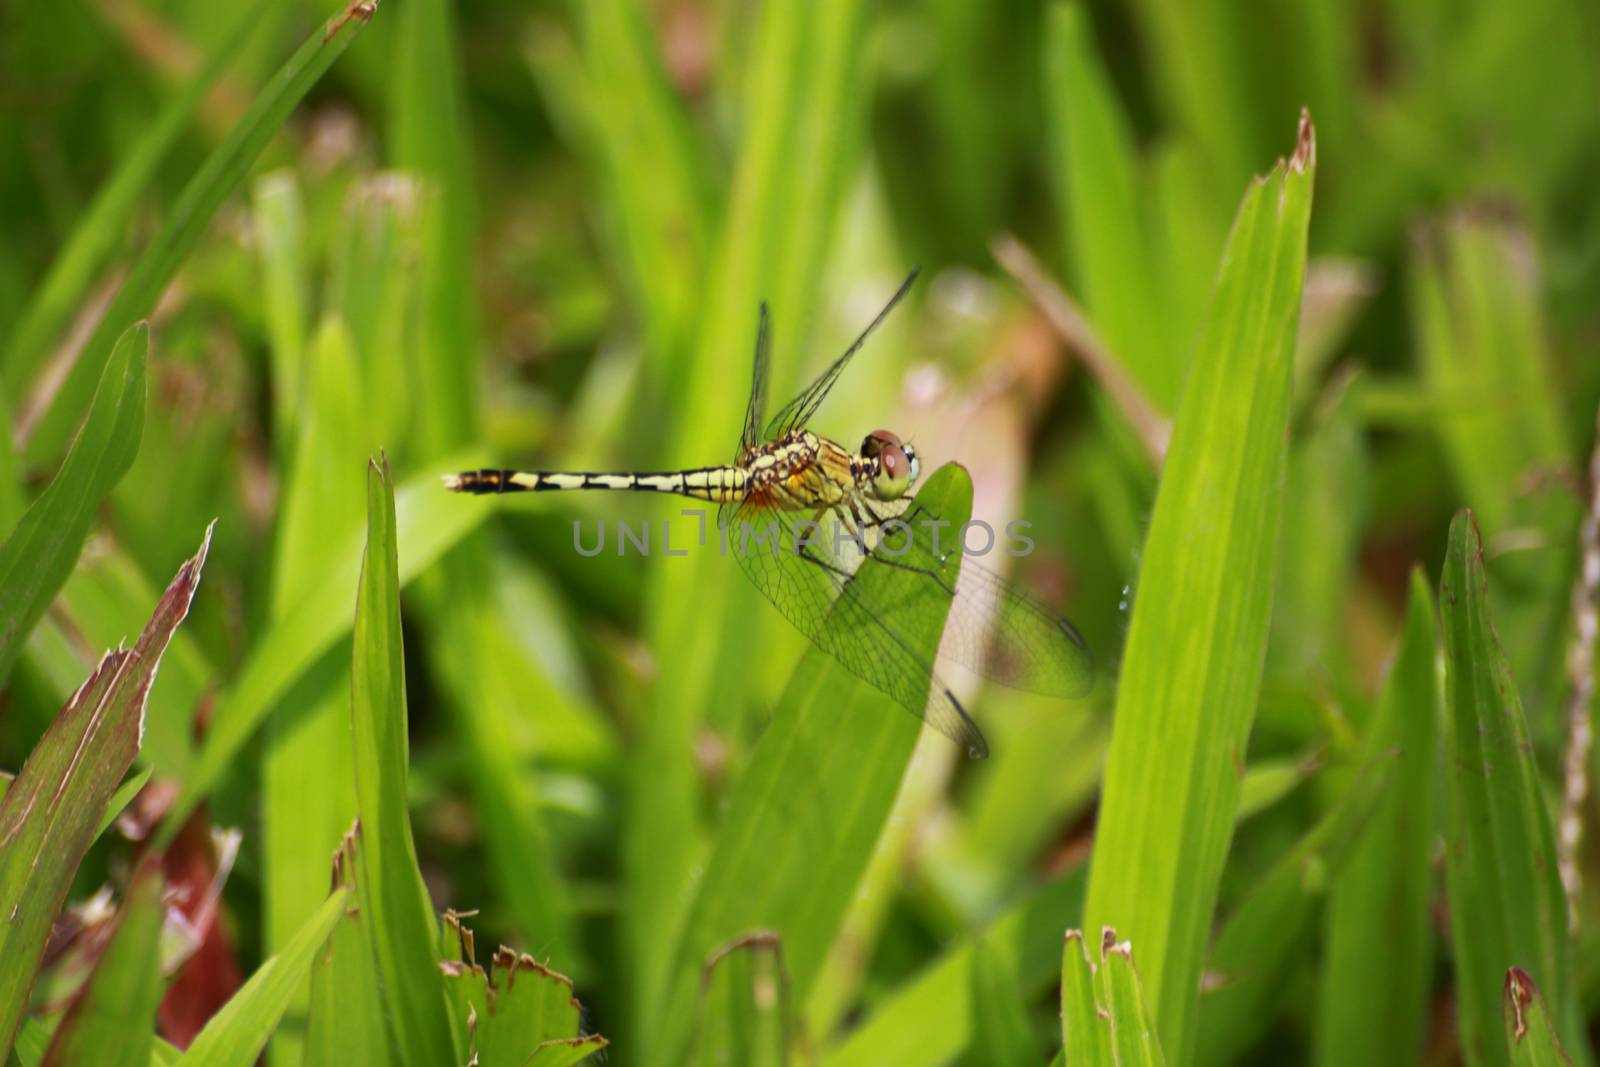 It is a dragonfly on the grassland.